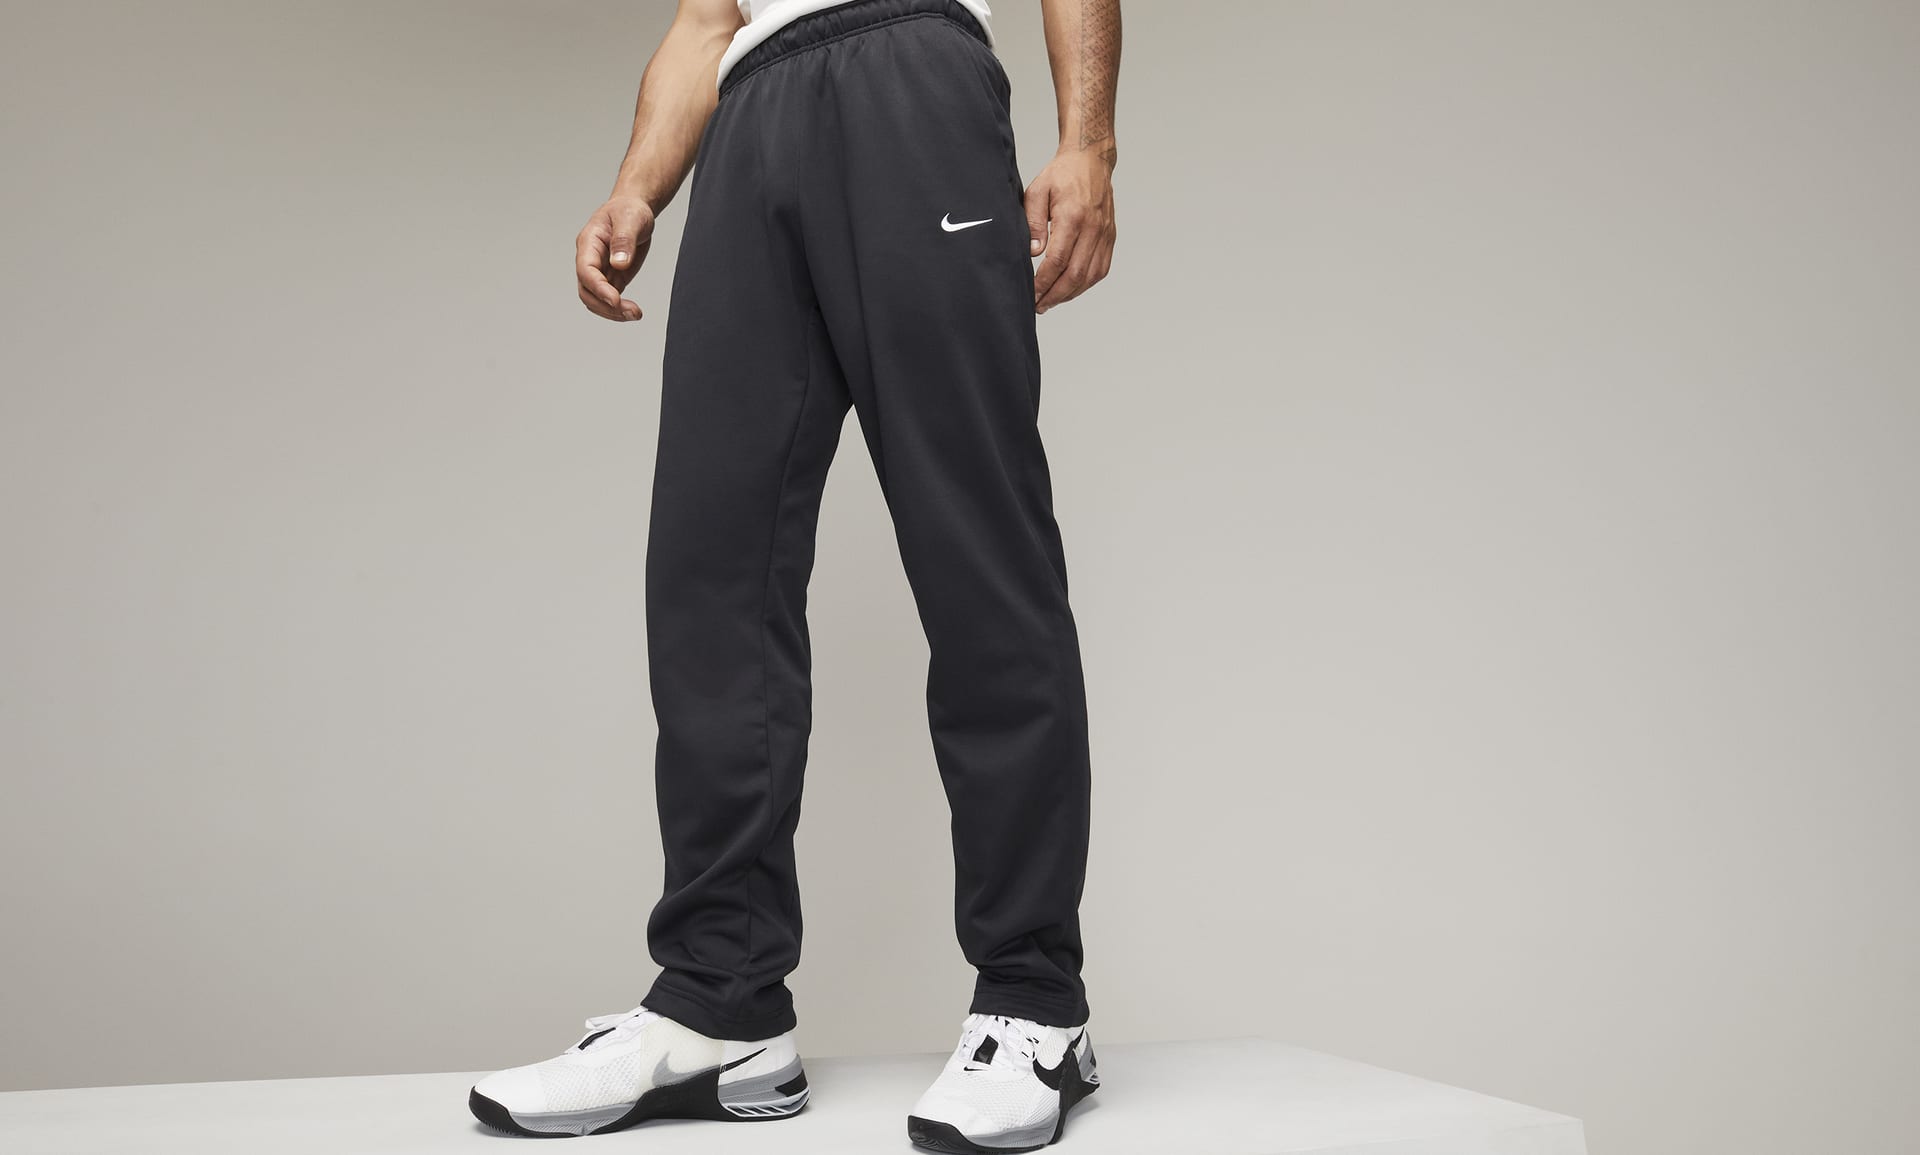 Nike Solid Button Straight Sports Pants/Trousers/Joggers Autumn Blue  'Multi-Color' - DH2571-410